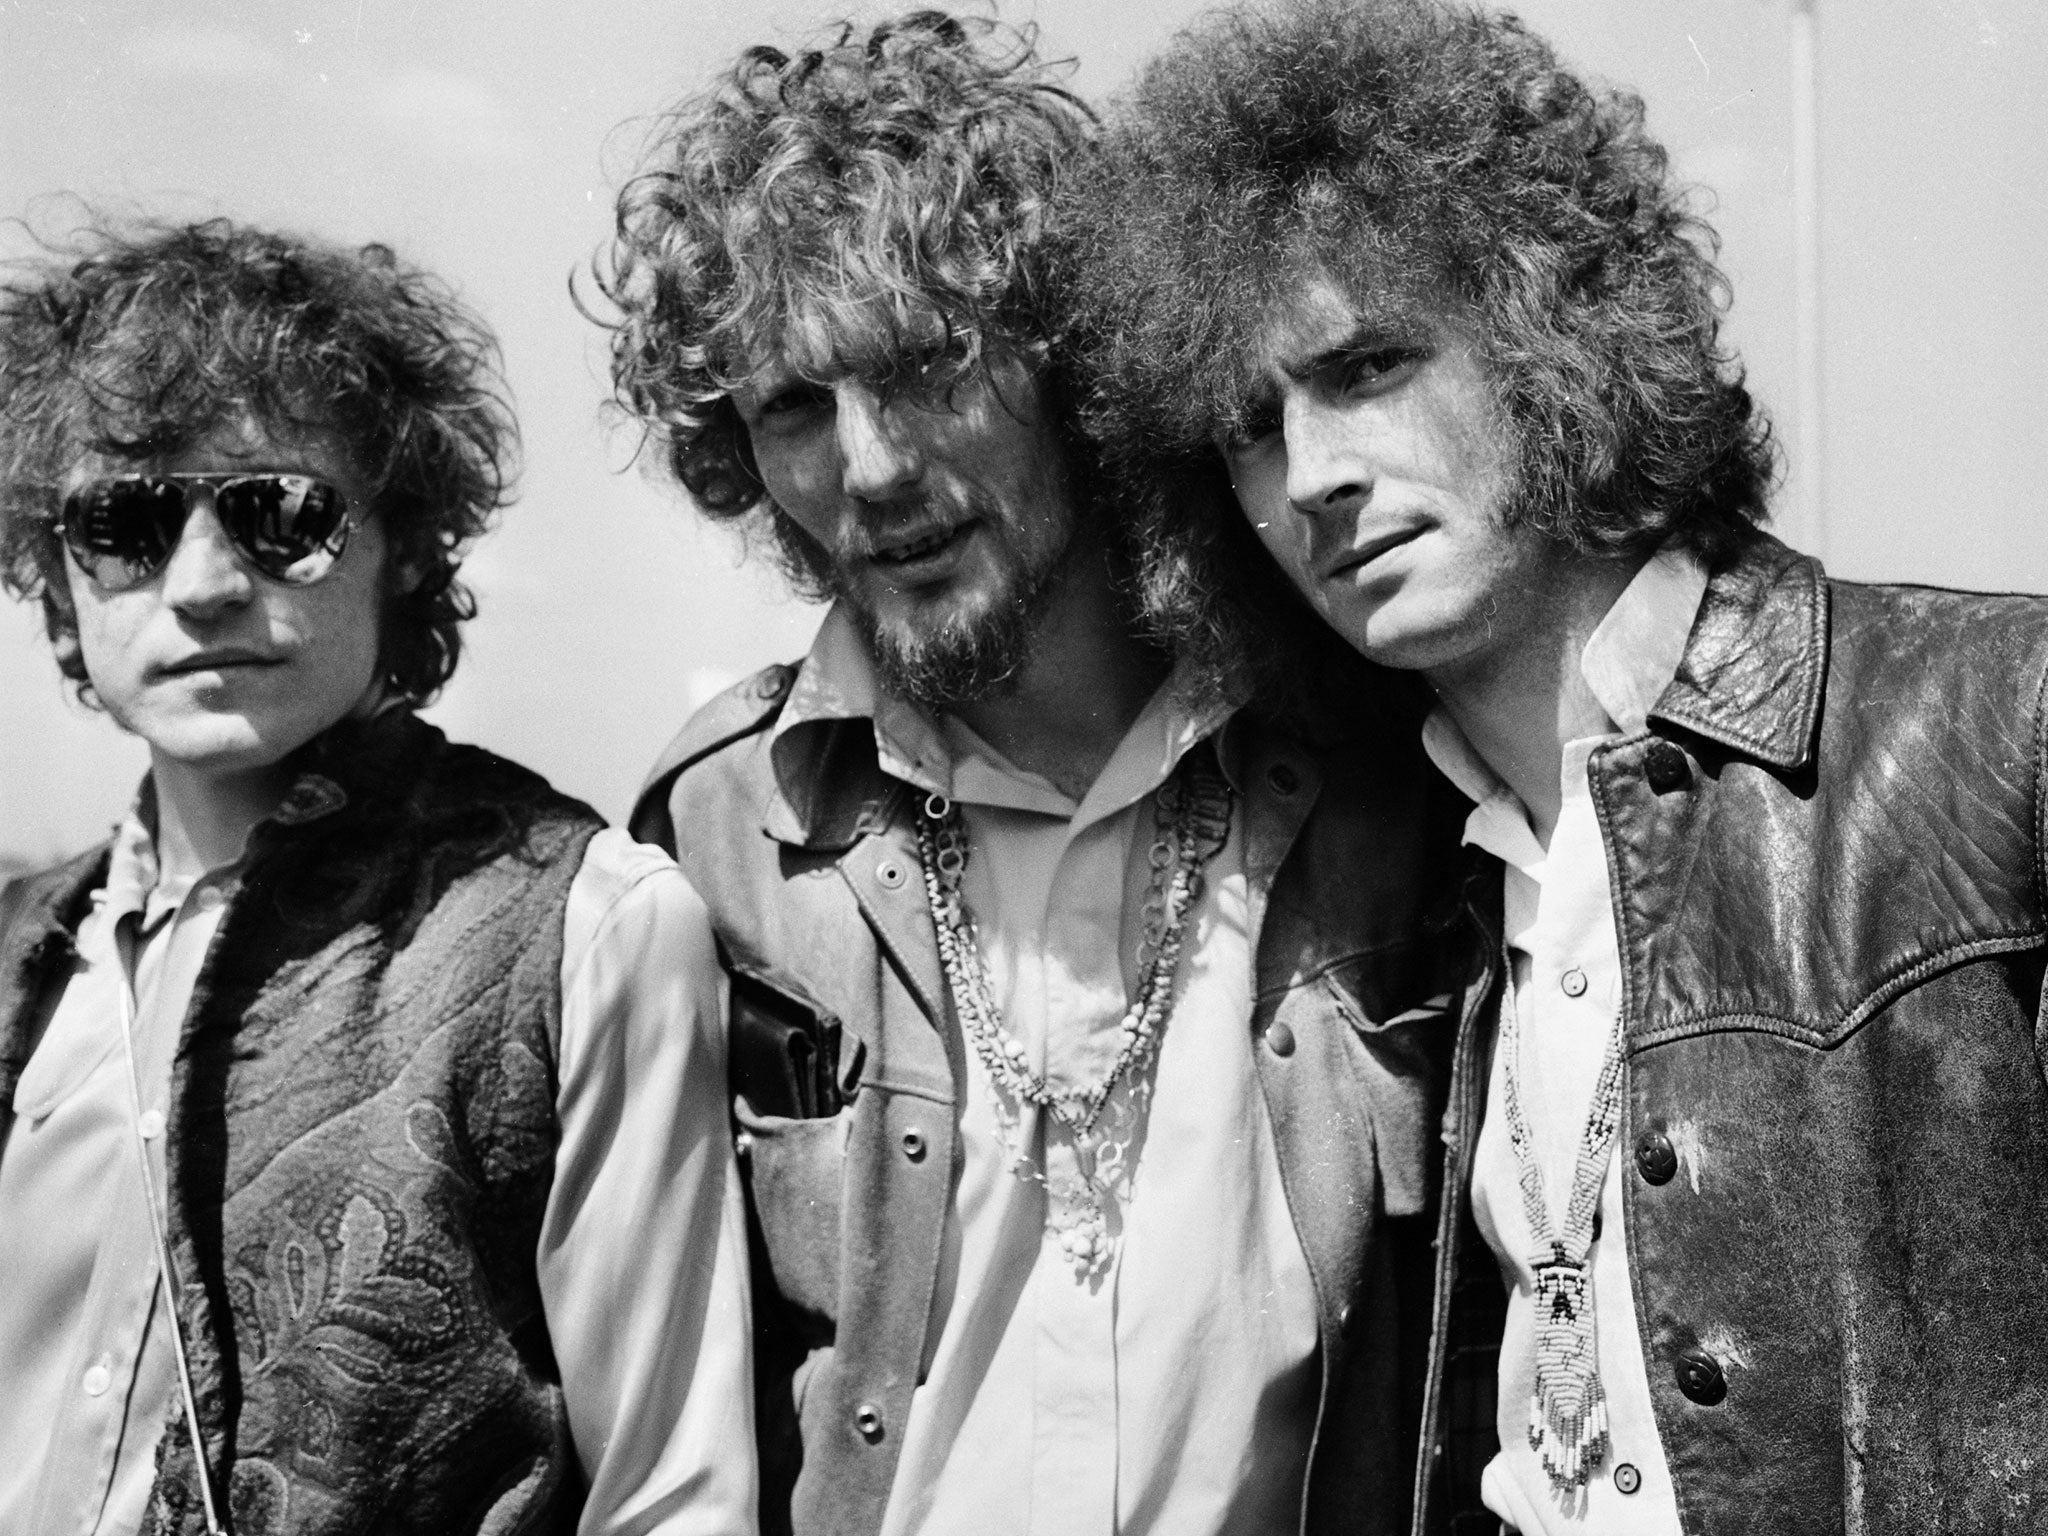 Jack Bruce, left, with Cream bandmates Ginger Baker, centre, and Eric Clapton in 1967